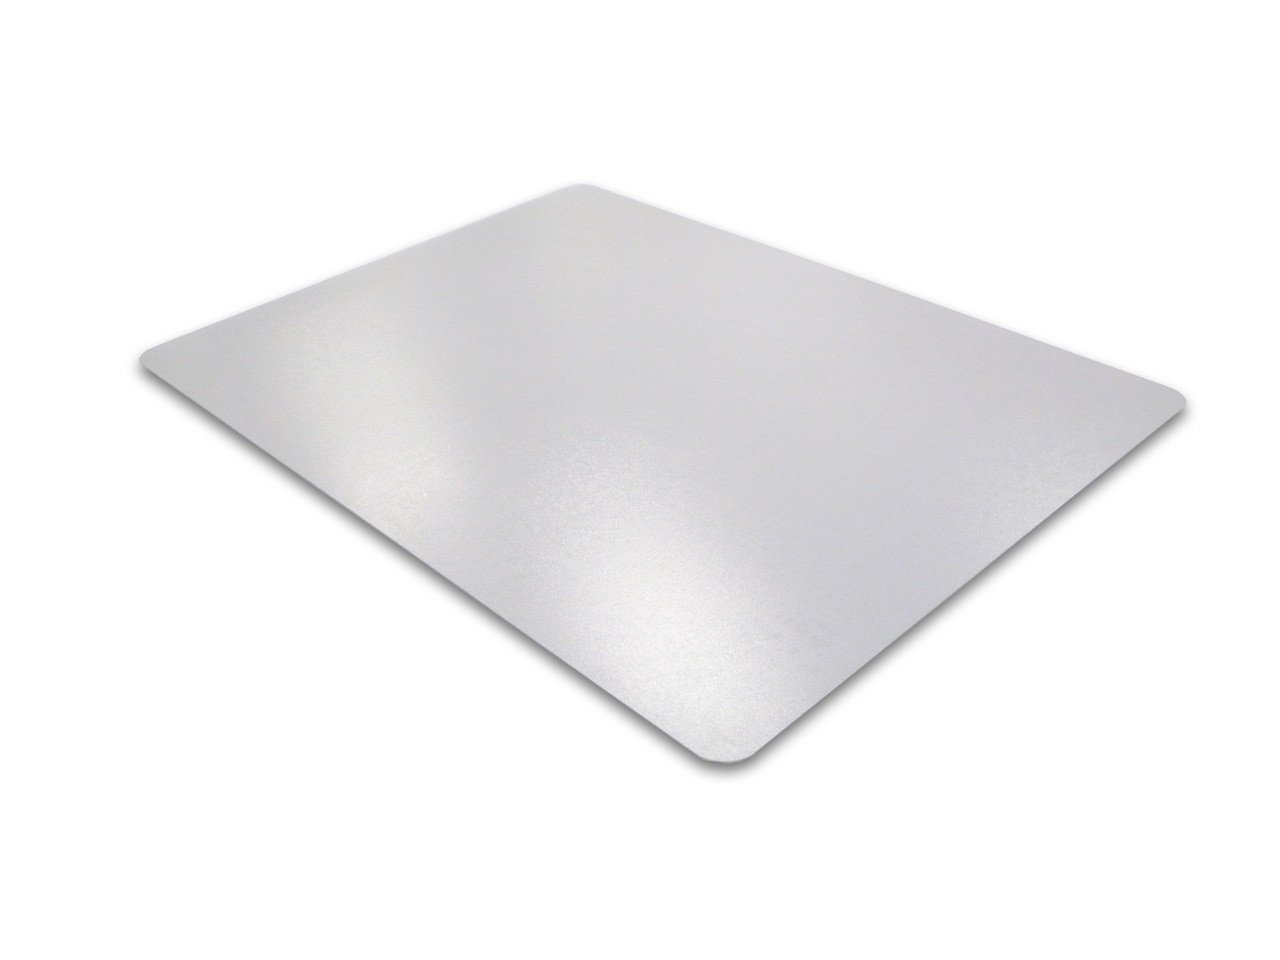 https://cdn11.bigcommerce.com/s-fjwps1jbkv/images/stencil/1280x1280/products/324/3236/cleartex-anti-slip-polycarbonate-floor-protector-exercise-mat-for-home-gyms-exercise-and-fitness-or-for-hard-floors-or-clear-with-non-slip-backing-or-rectangular-or-multiple-sizes__69582.1688989837.jpg?c=2?imbypass=on